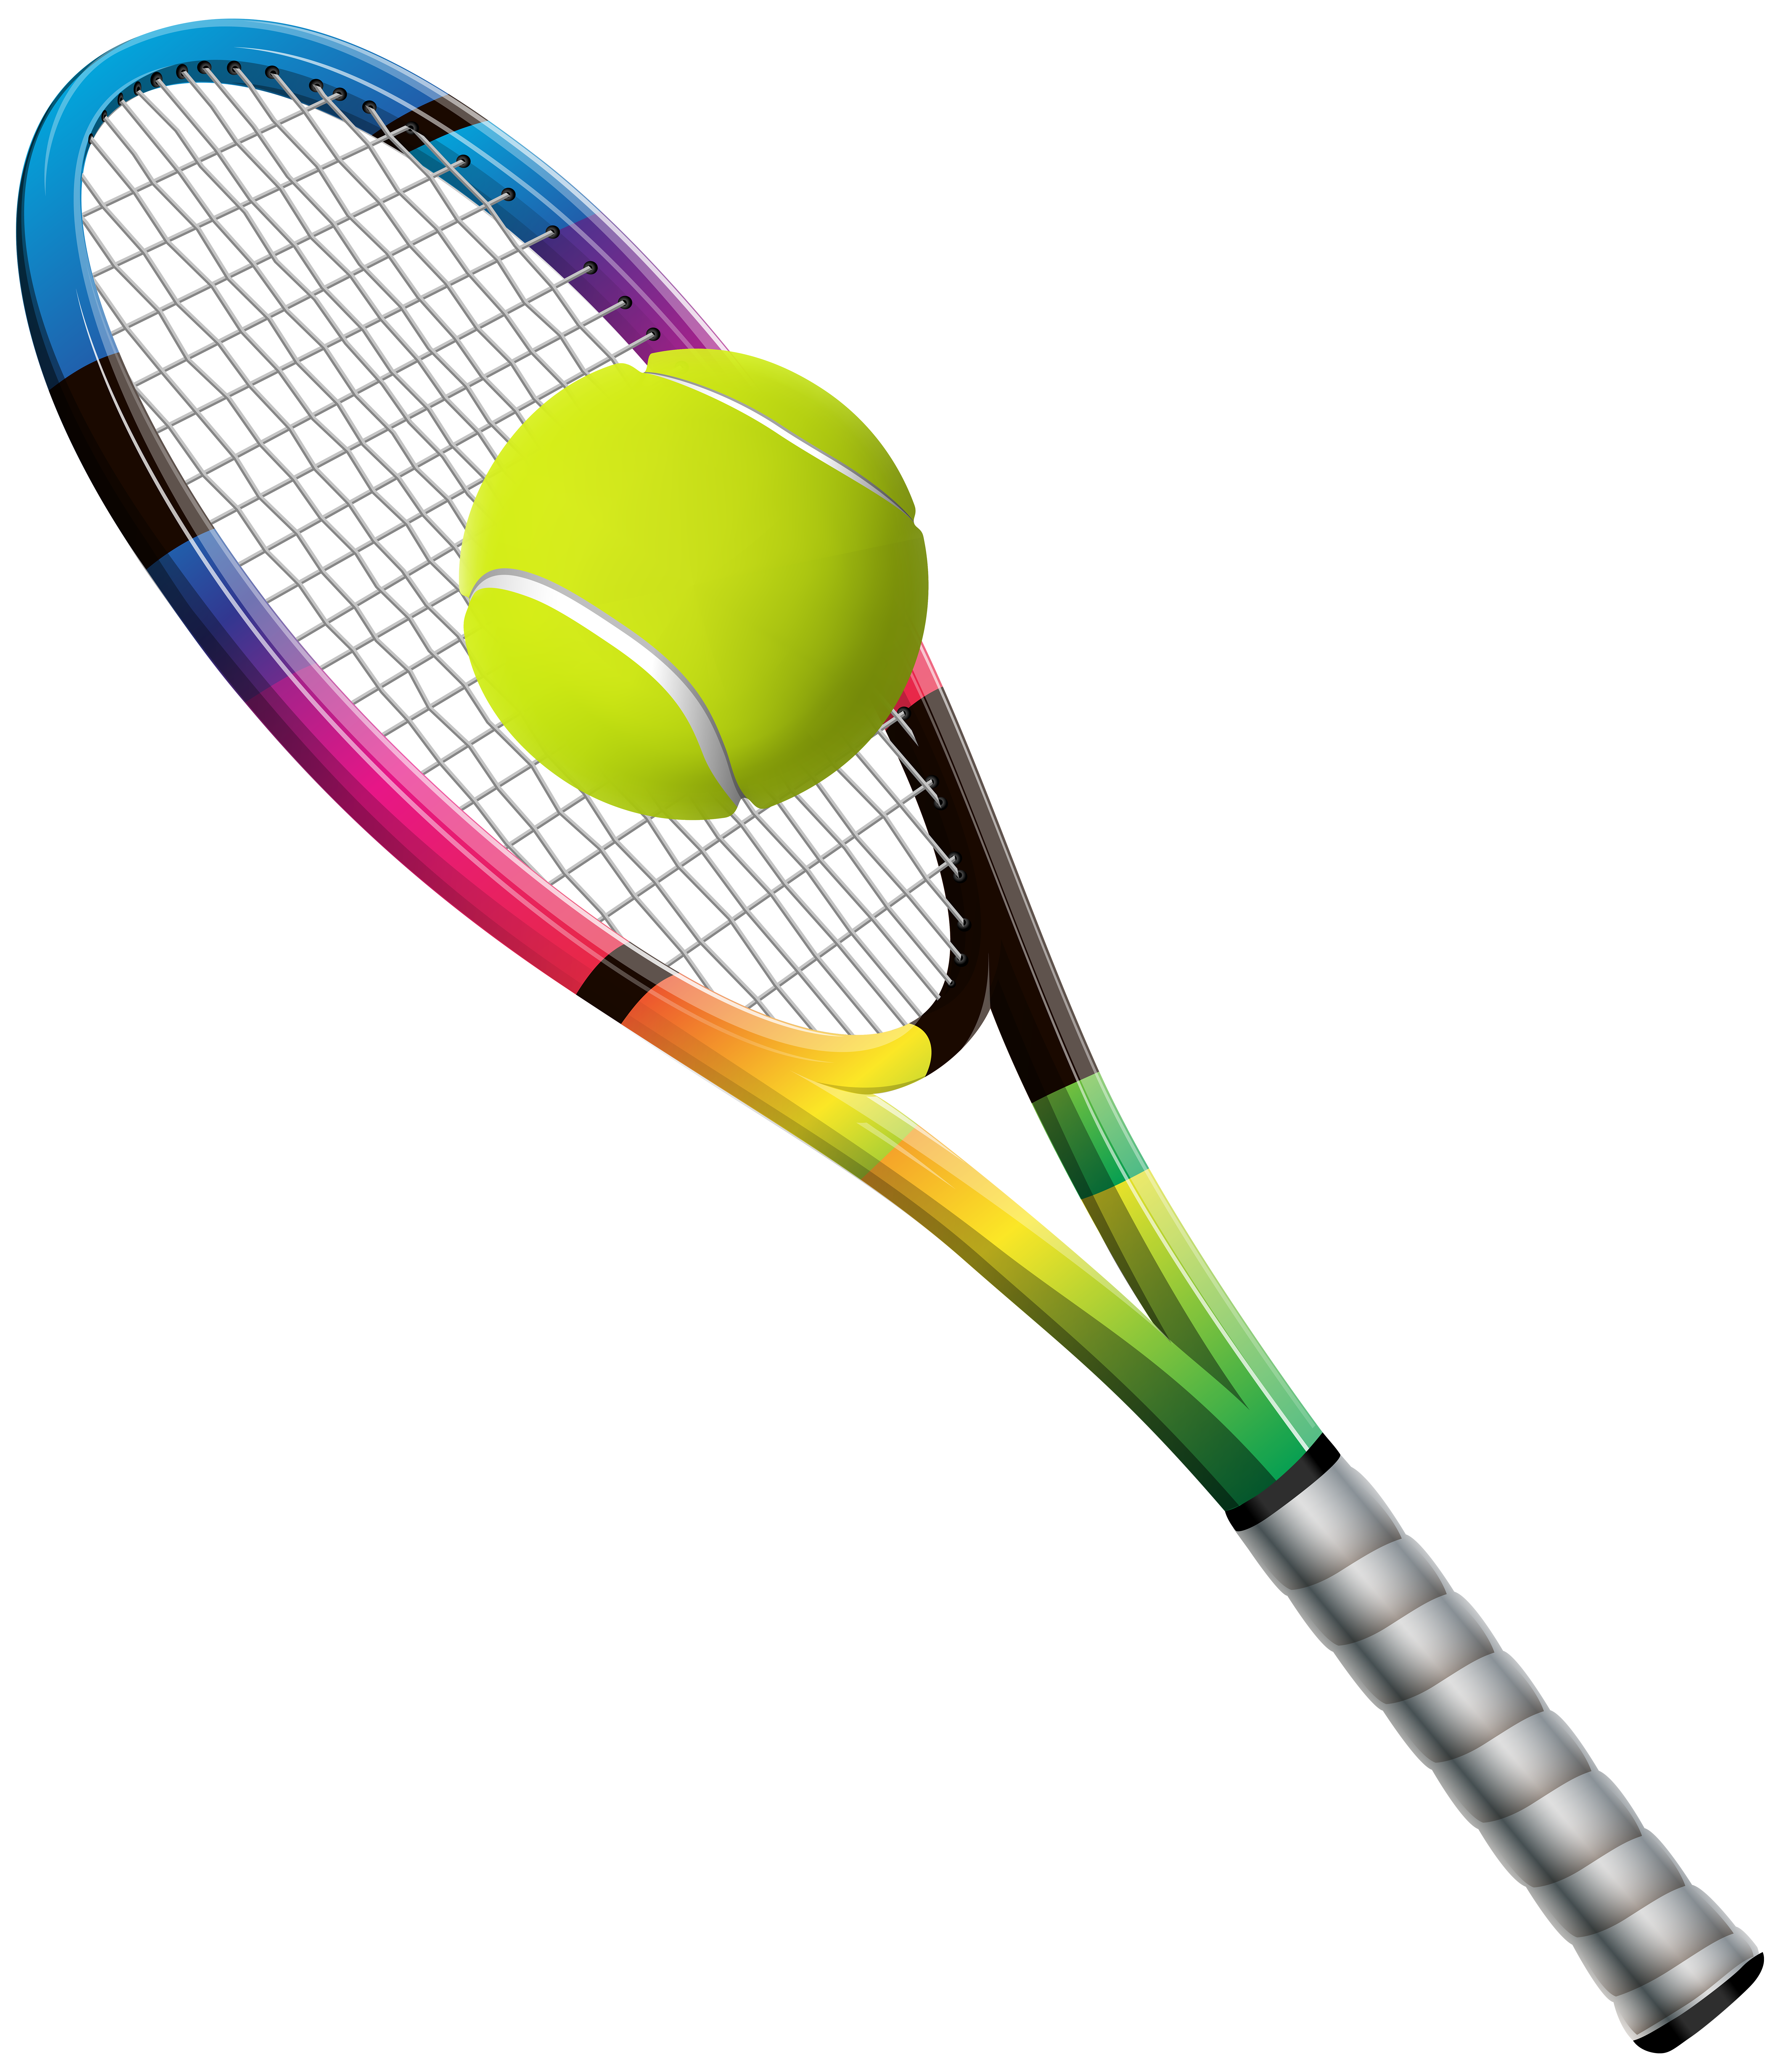 Tennis Racket and Ball Transparent PNG Clip Art Image | Gallery ...